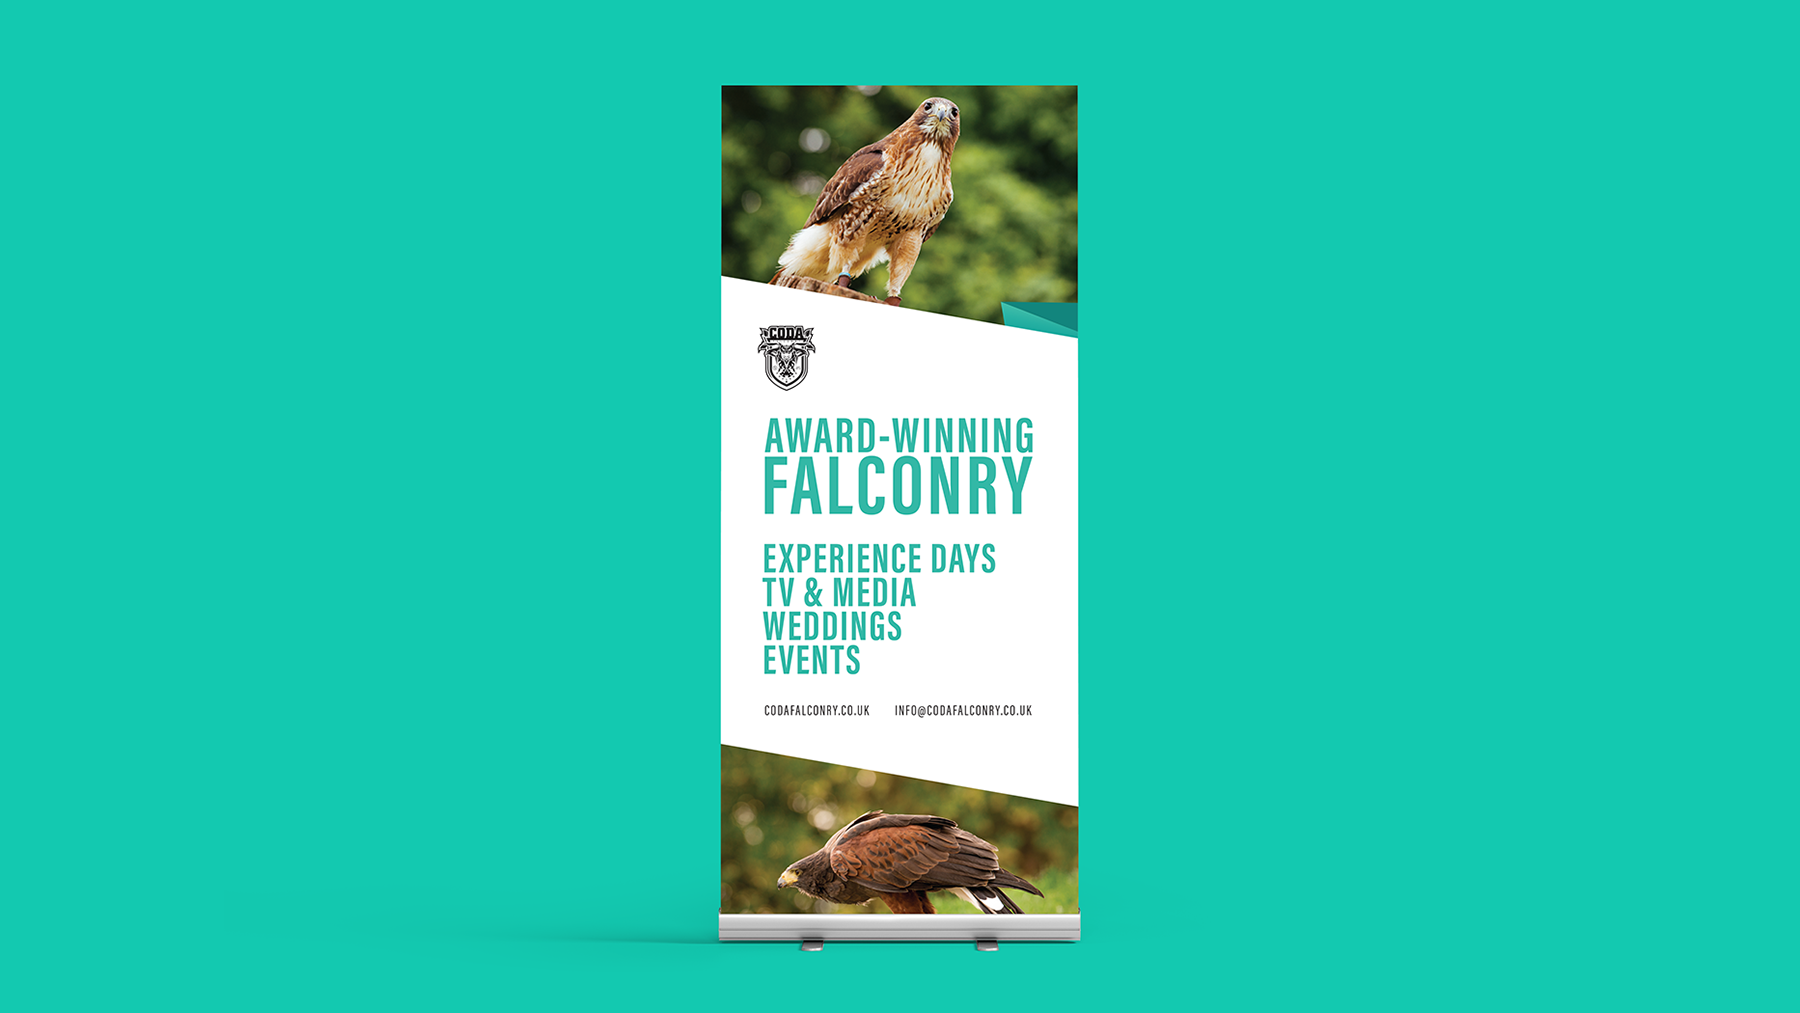 Roller banner design featuring a red-tailed hawk for Coda Falconry.